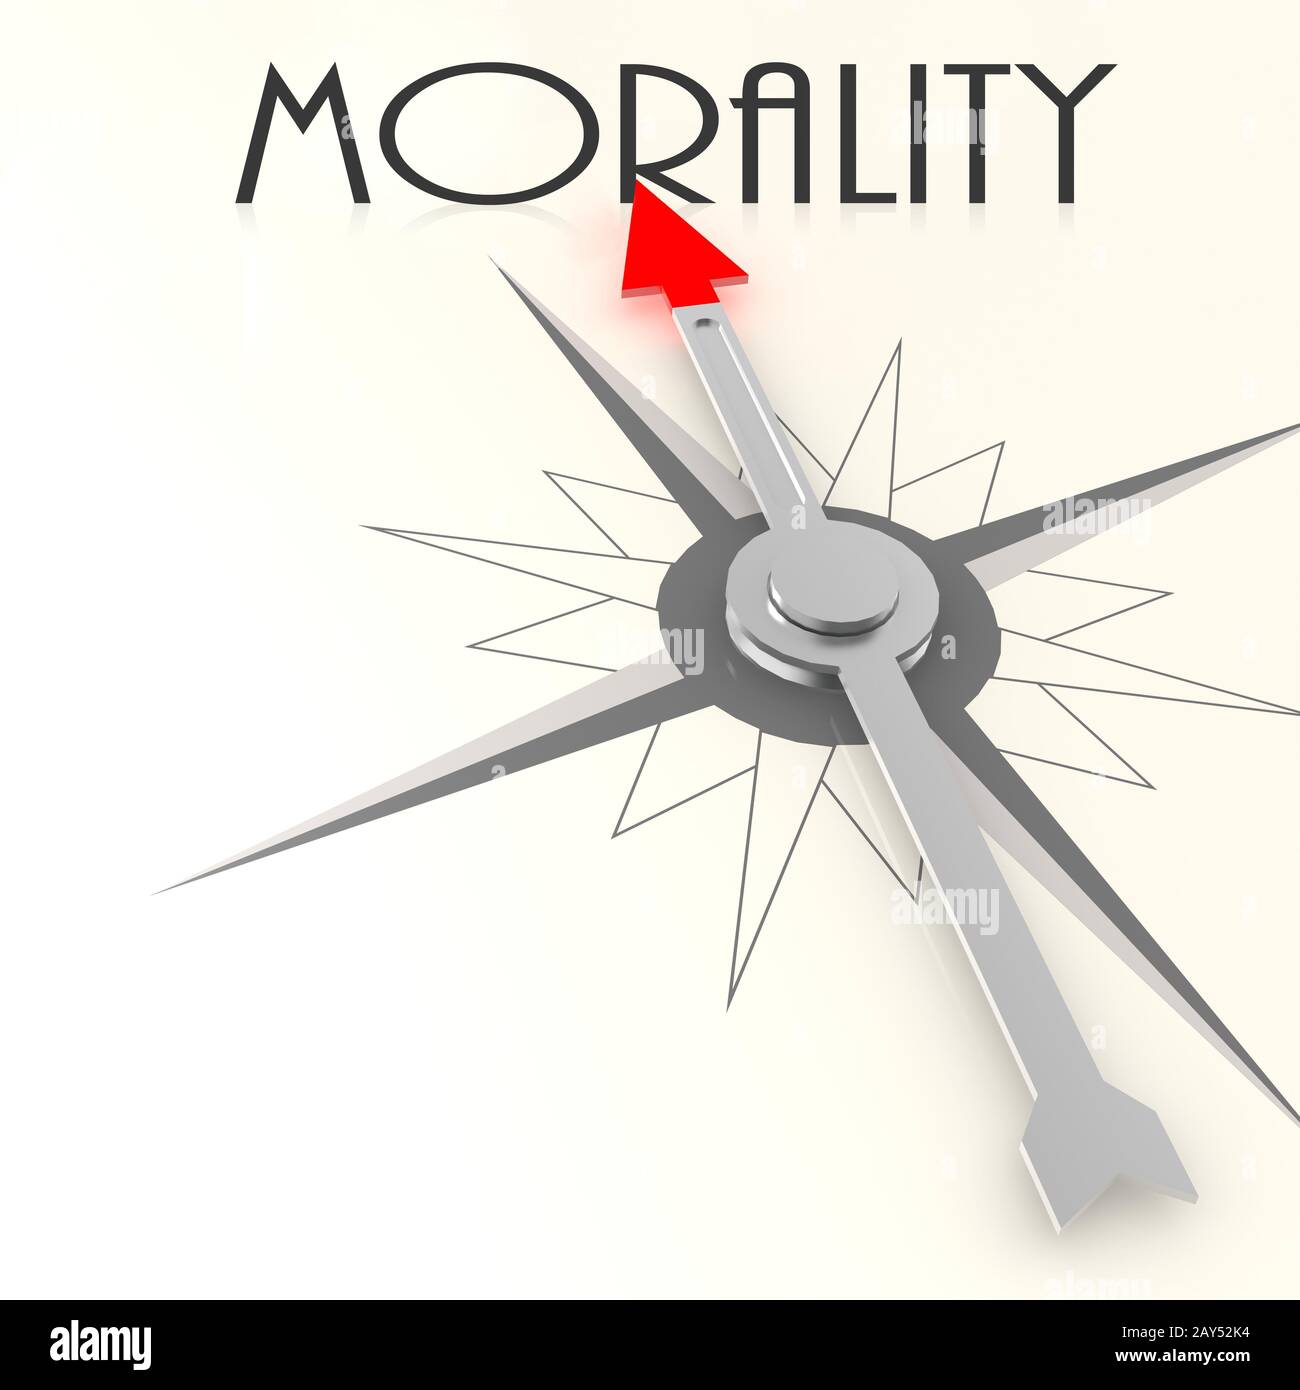 Compass with morality word Stock Photo